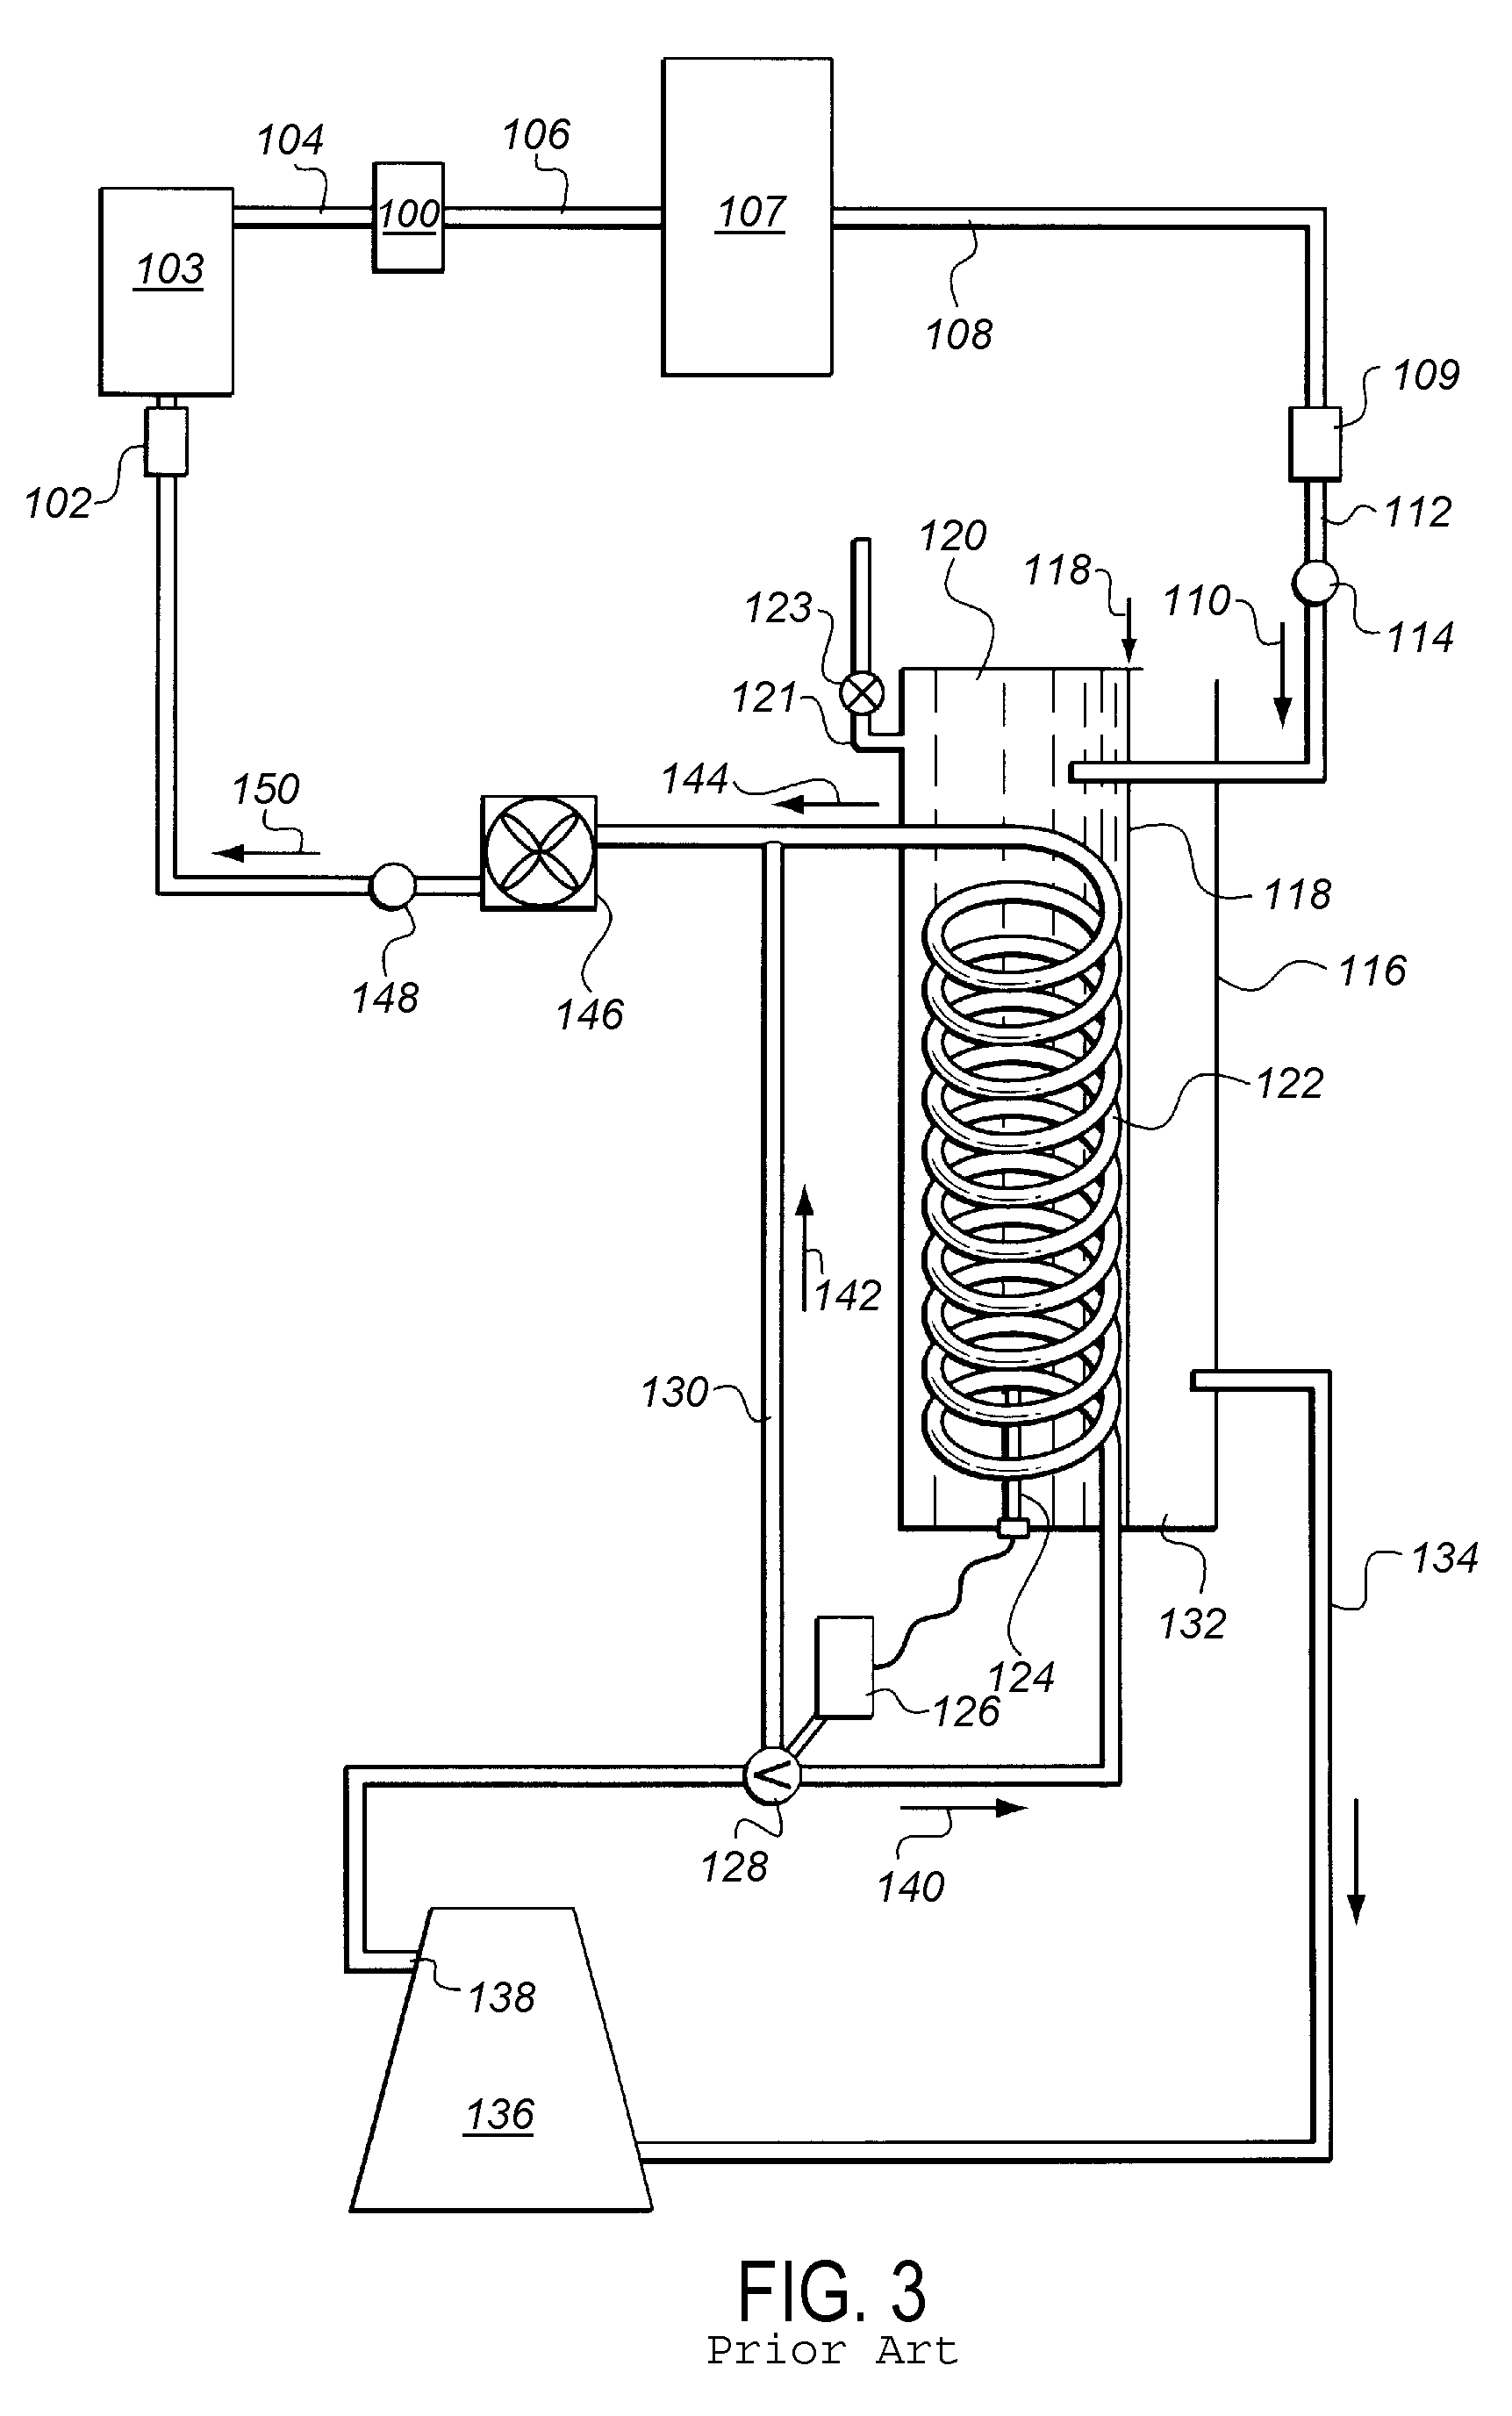 Method and apparatus for optimizing refrigeration systems